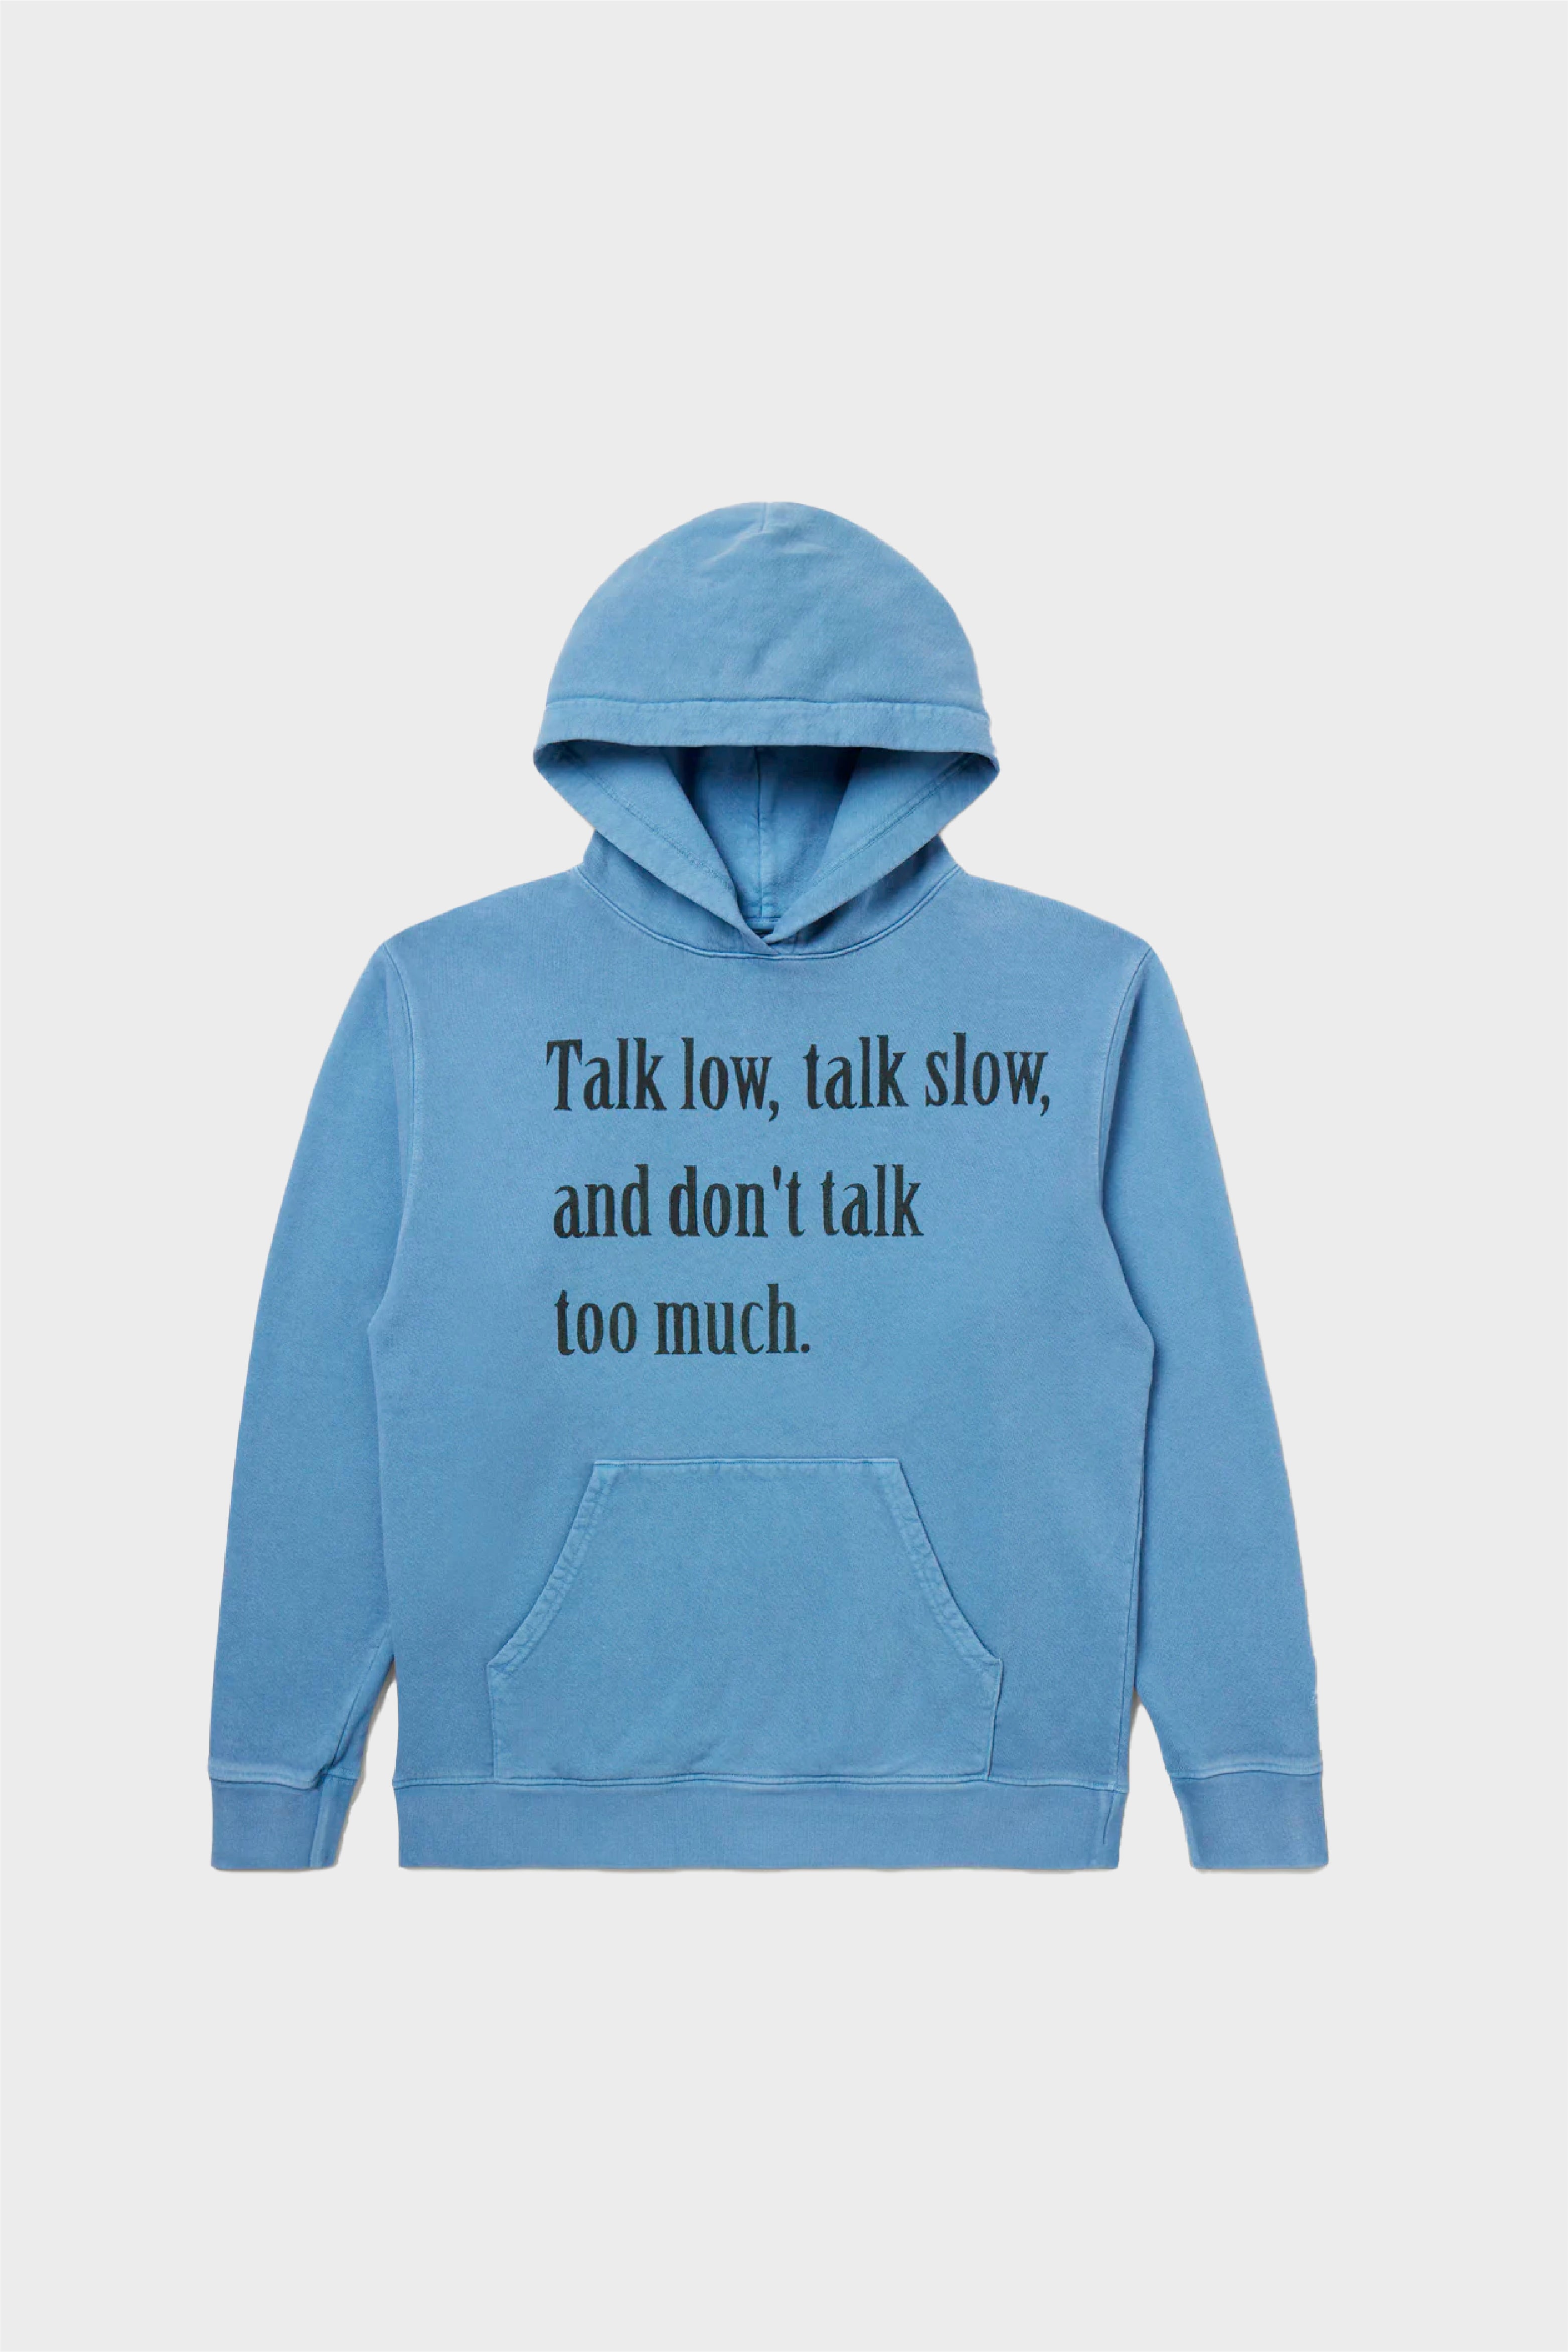 Selectshop FRAME - ONE OF THESE DAYS Talk Low, Talk Slow Hoodie Sweats-Knits Concept Store Dubai